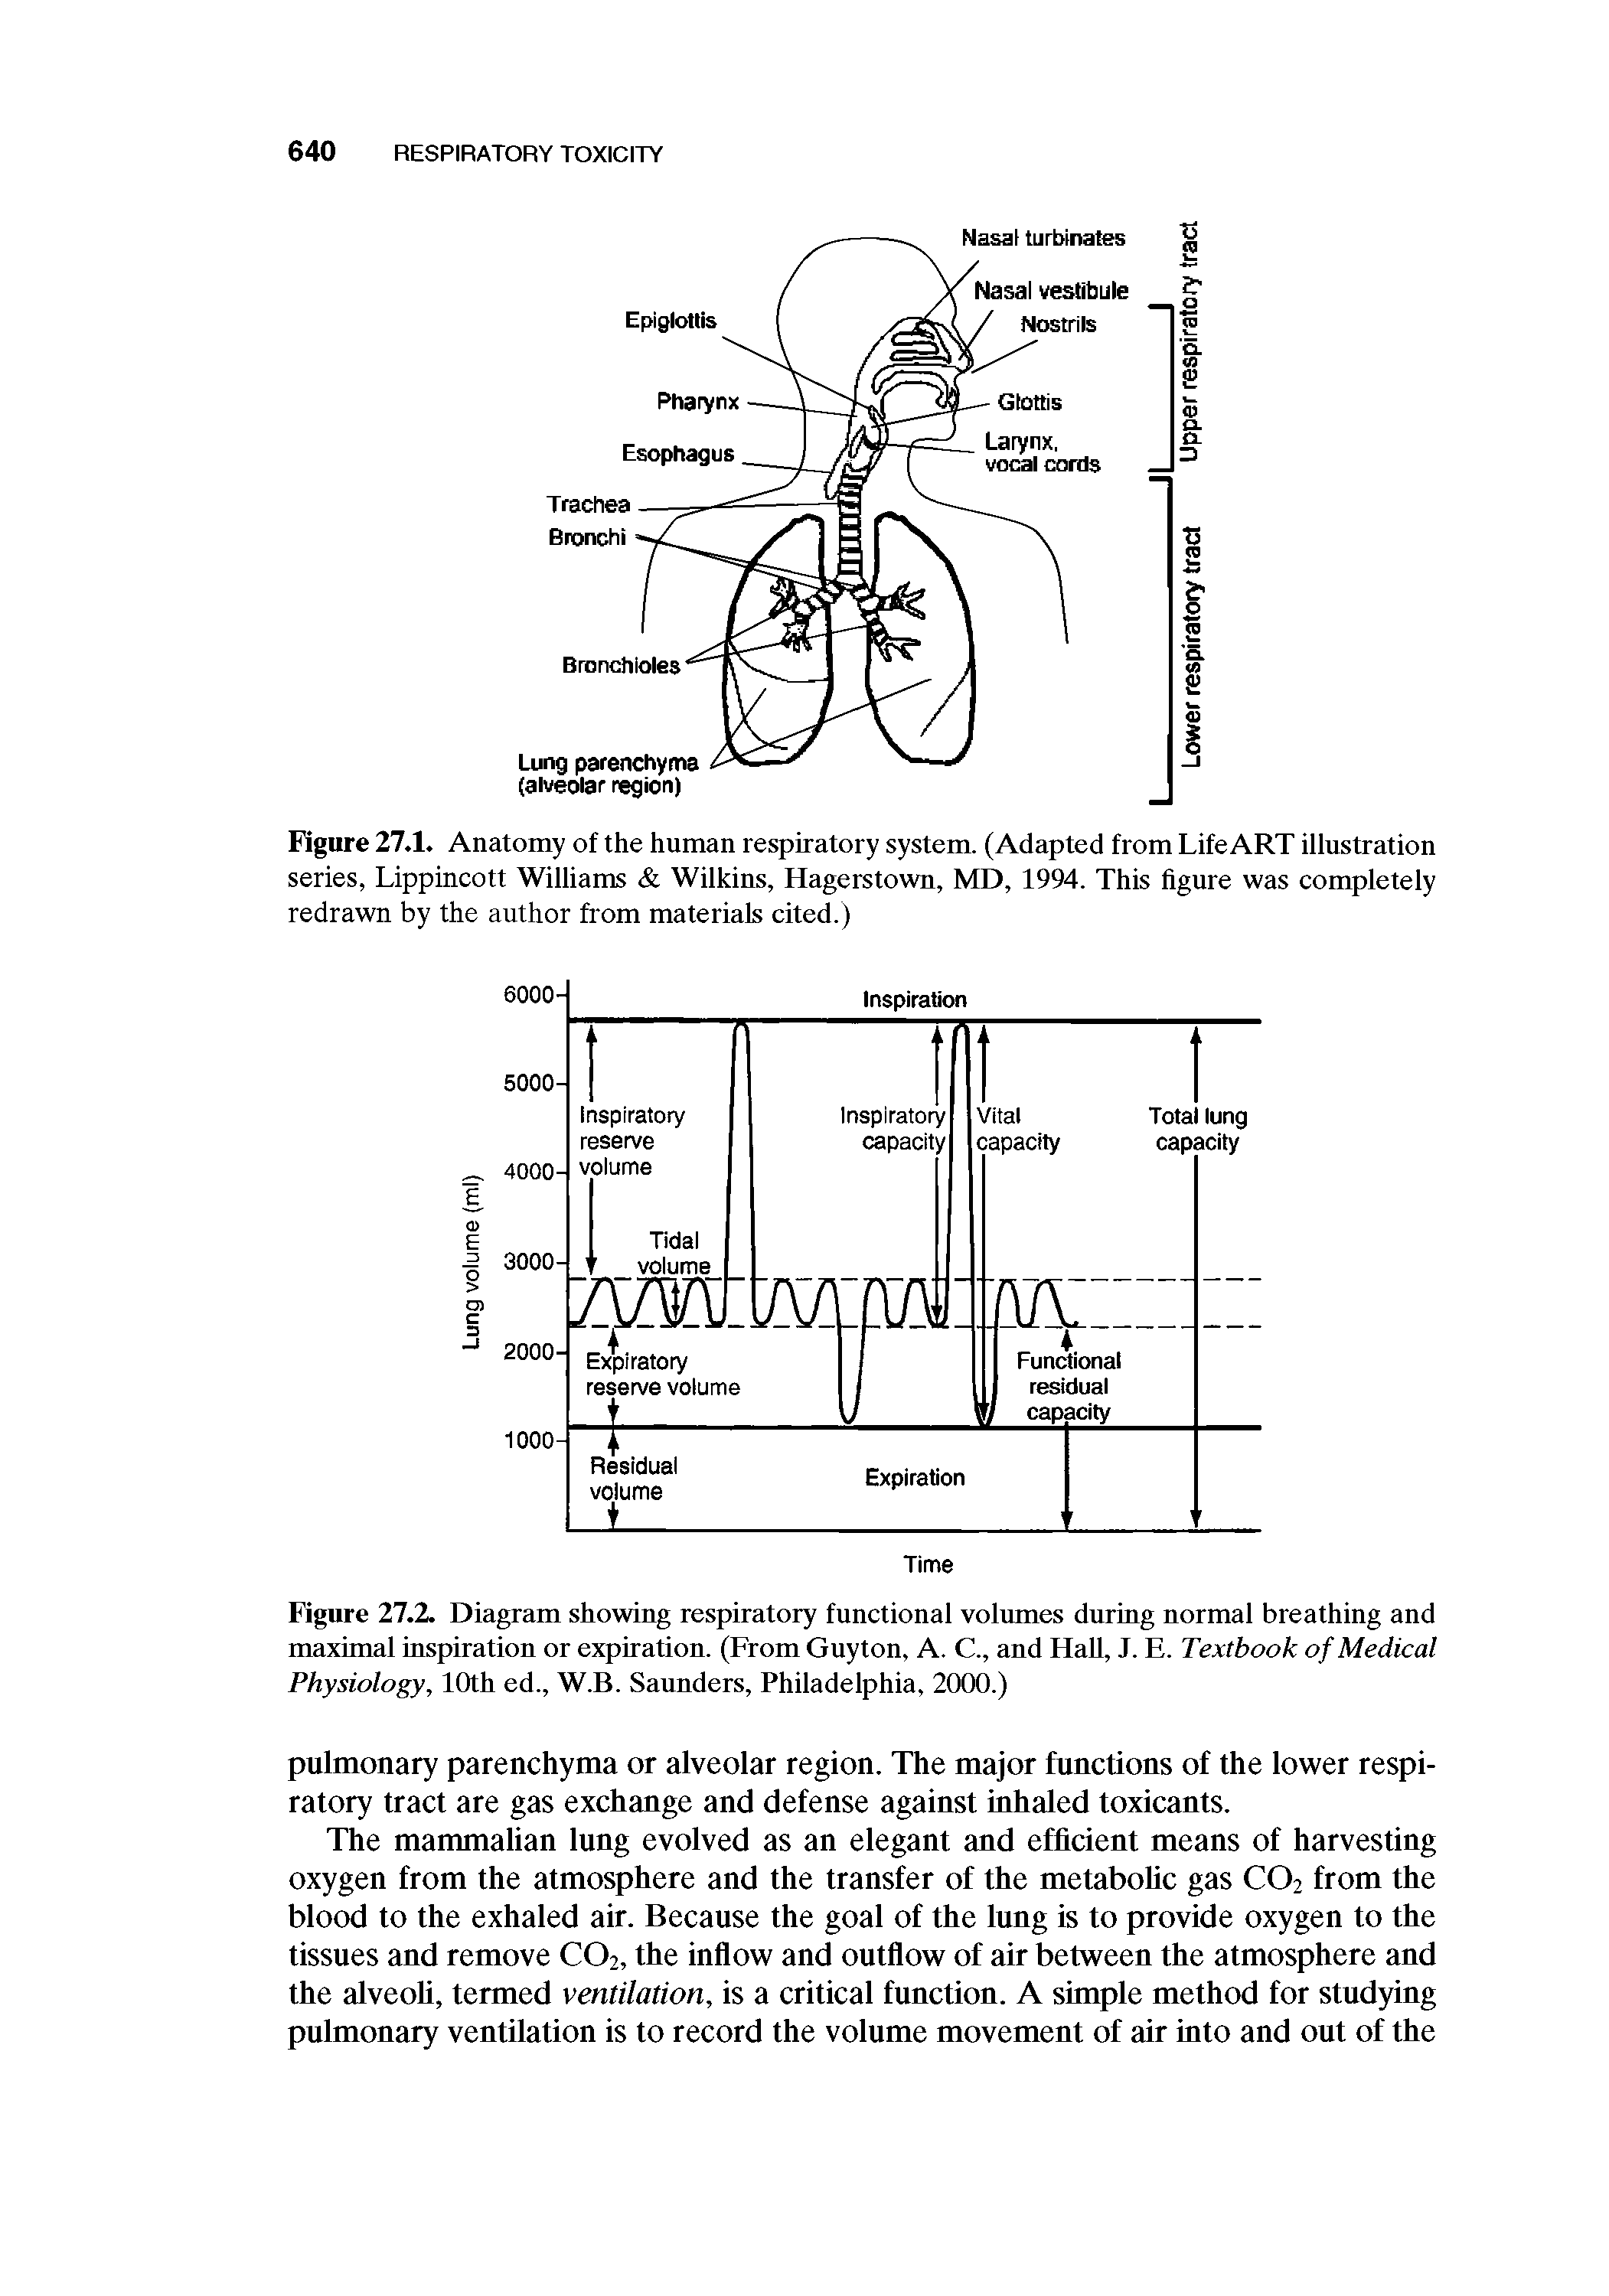 Figure 27.1. Anatomy of the human respiratory system. (Adapted from Life ART illustration series, Lippincott Williams Wilkins, Hagerstown, MD, 1994. This figure was completely redrawn by the author from materials cited.)...